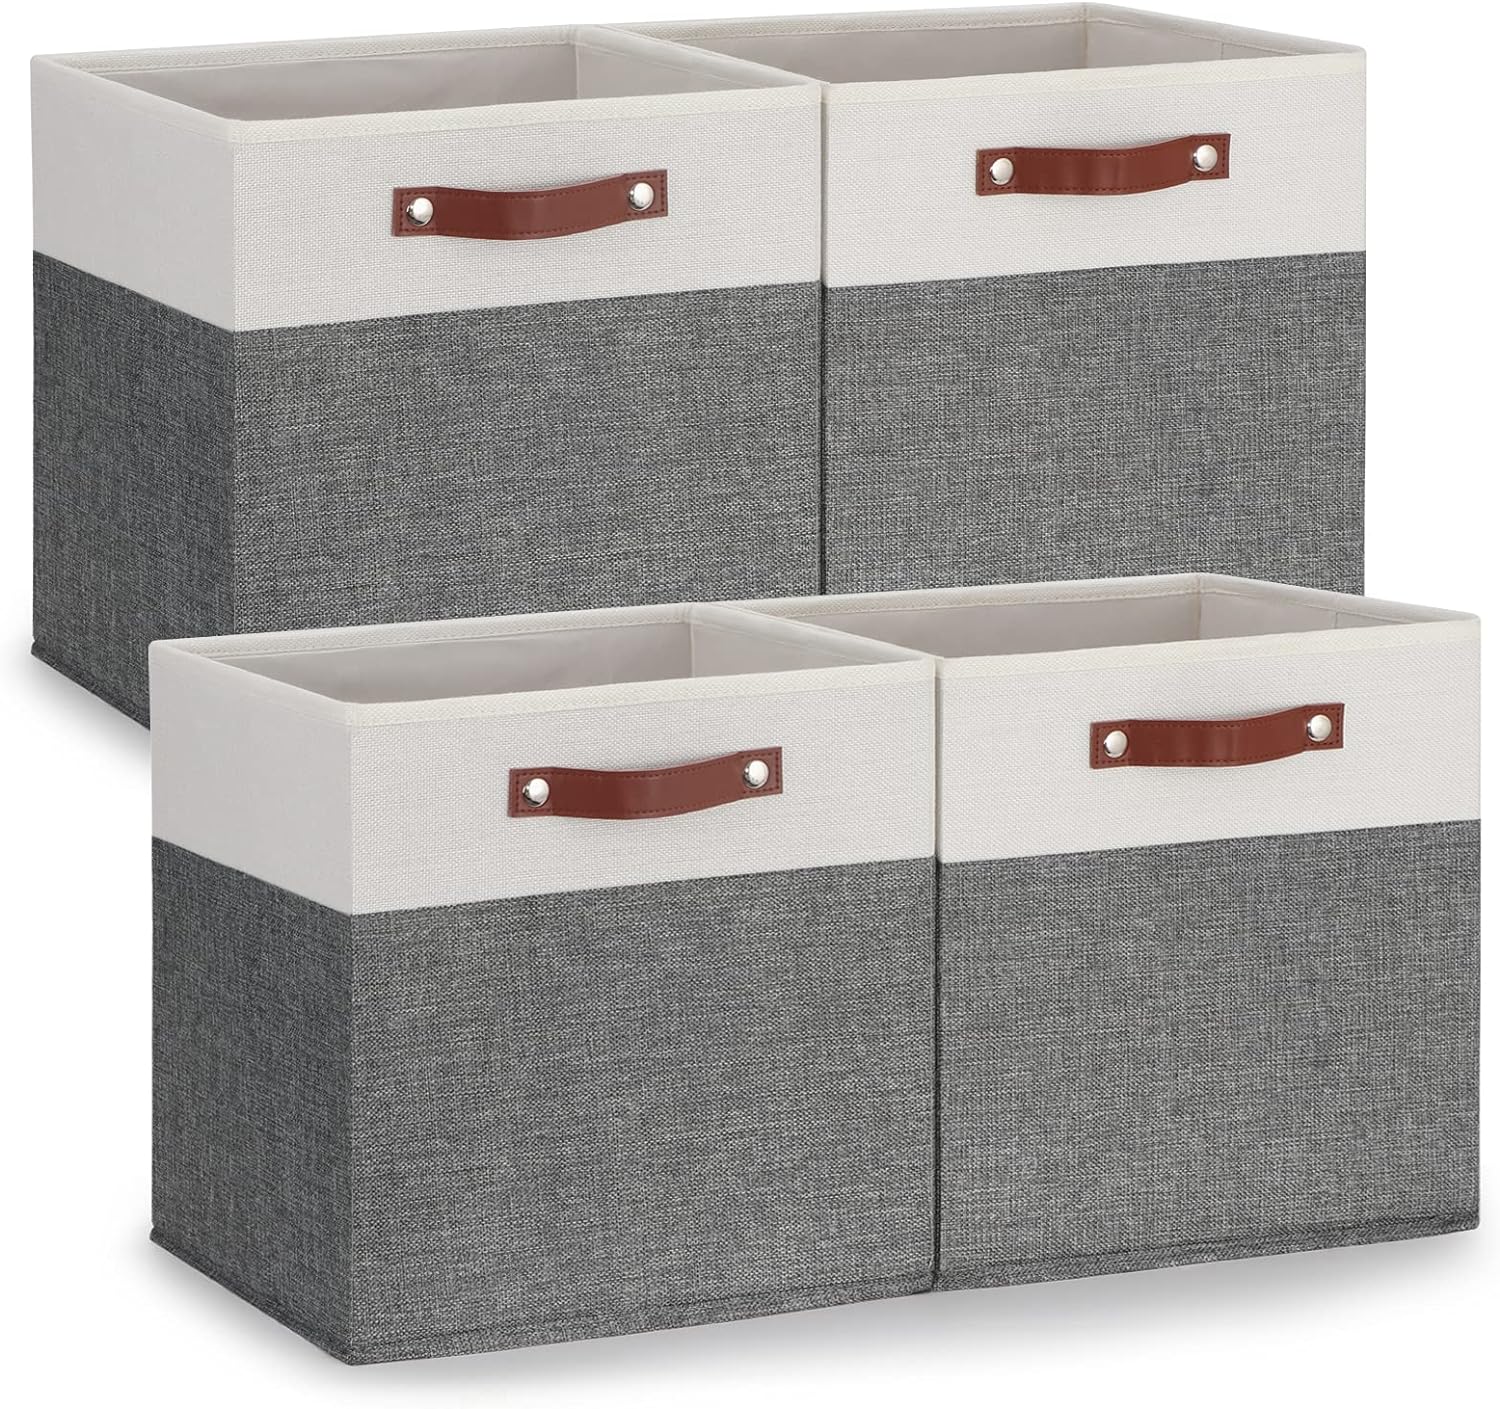 Temary 13x13 Storage Cubes 4 Pack Fabric Cube Storage Bins Large Storage Baskets with Leather Handles, Decorative Storage Boxes for Organizing Closet, Clothes, Toys Foldable Cloth Baskets for Shelves